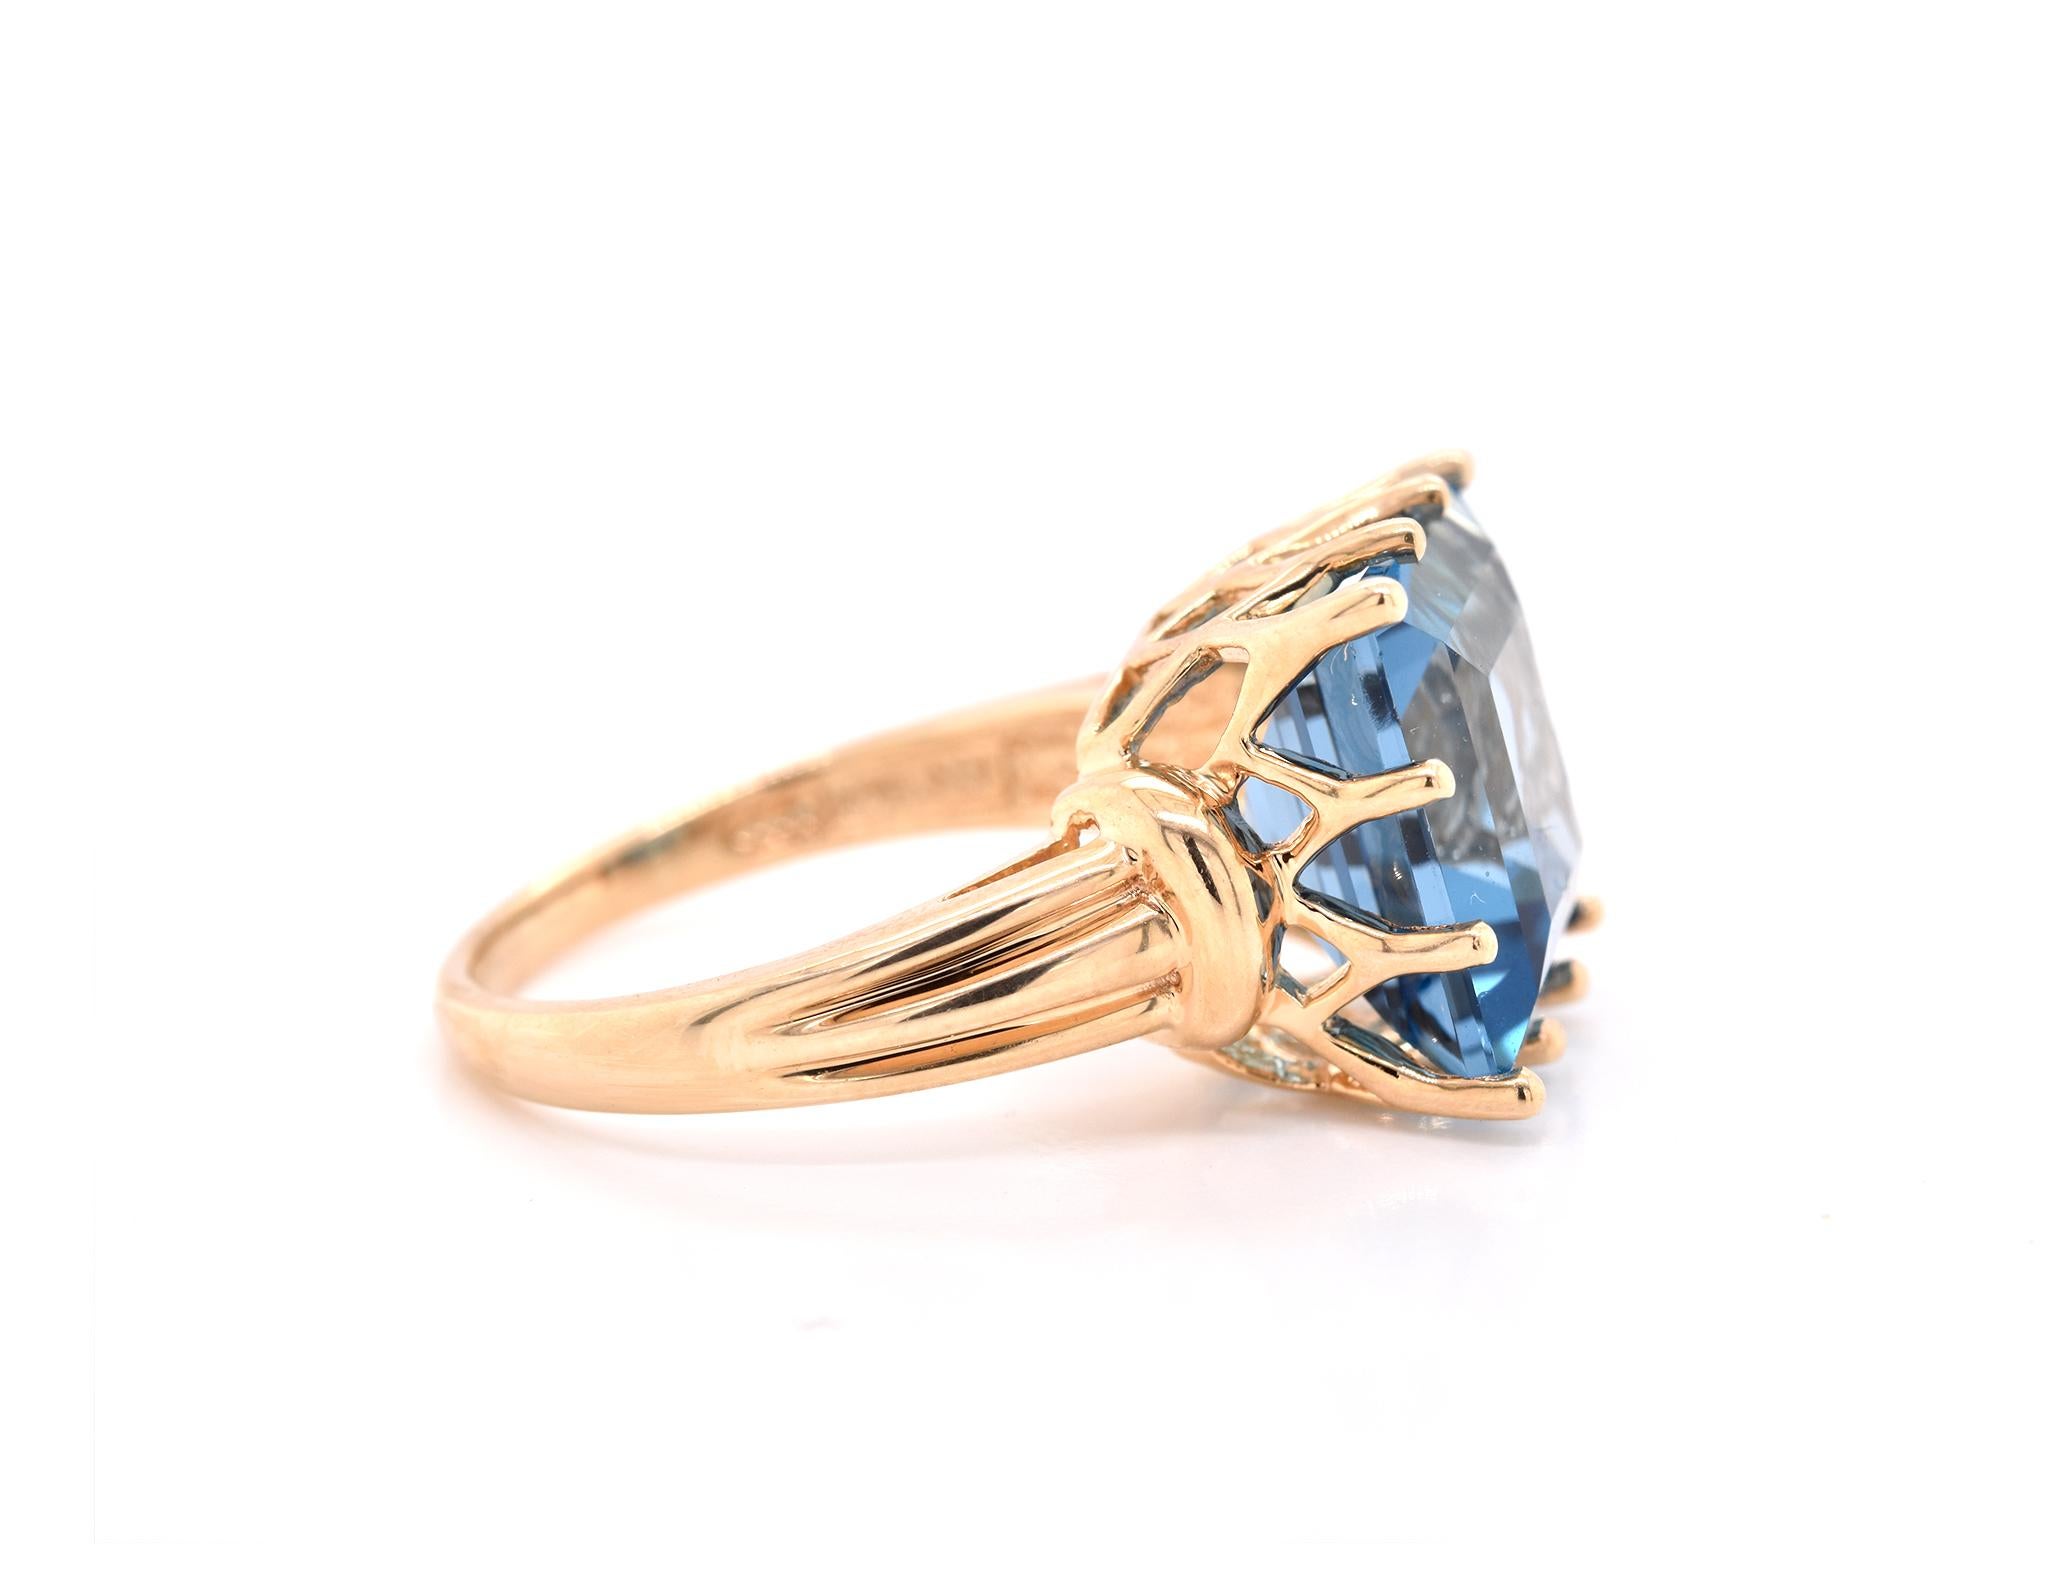 Material: 10k yellow gold
Gemstone: 1 square step cut blue topaz
Ring Size: 7 ¾ (please allow two additional shipping days for sizing requests)
Dimensions: ring top measures 13.95mm x 13.95mm
Weight: 5.6 grams
